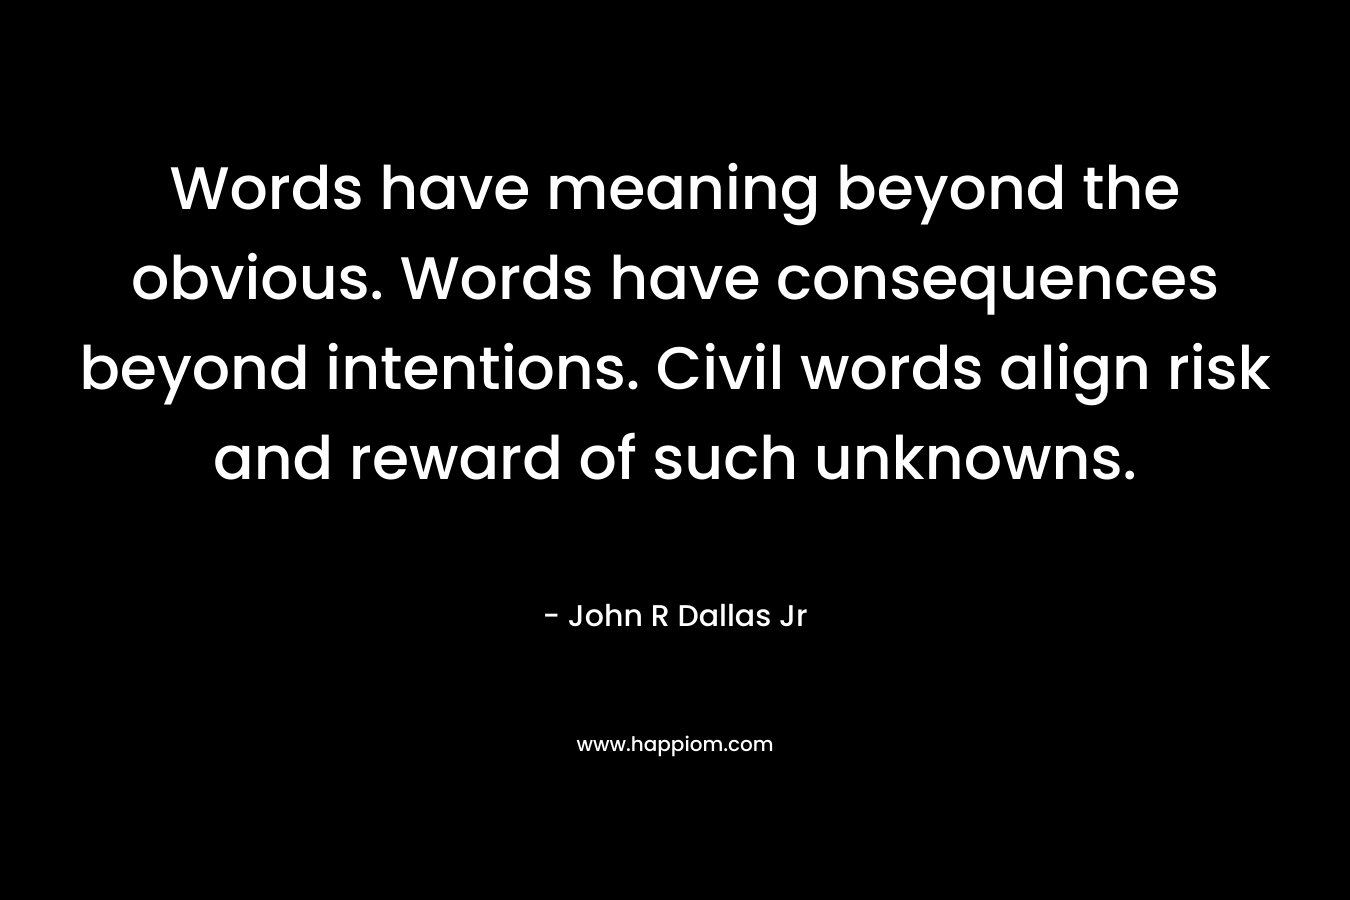 Words have meaning beyond the obvious. Words have consequences beyond intentions. Civil words align risk and reward of such unknowns. – John R Dallas Jr